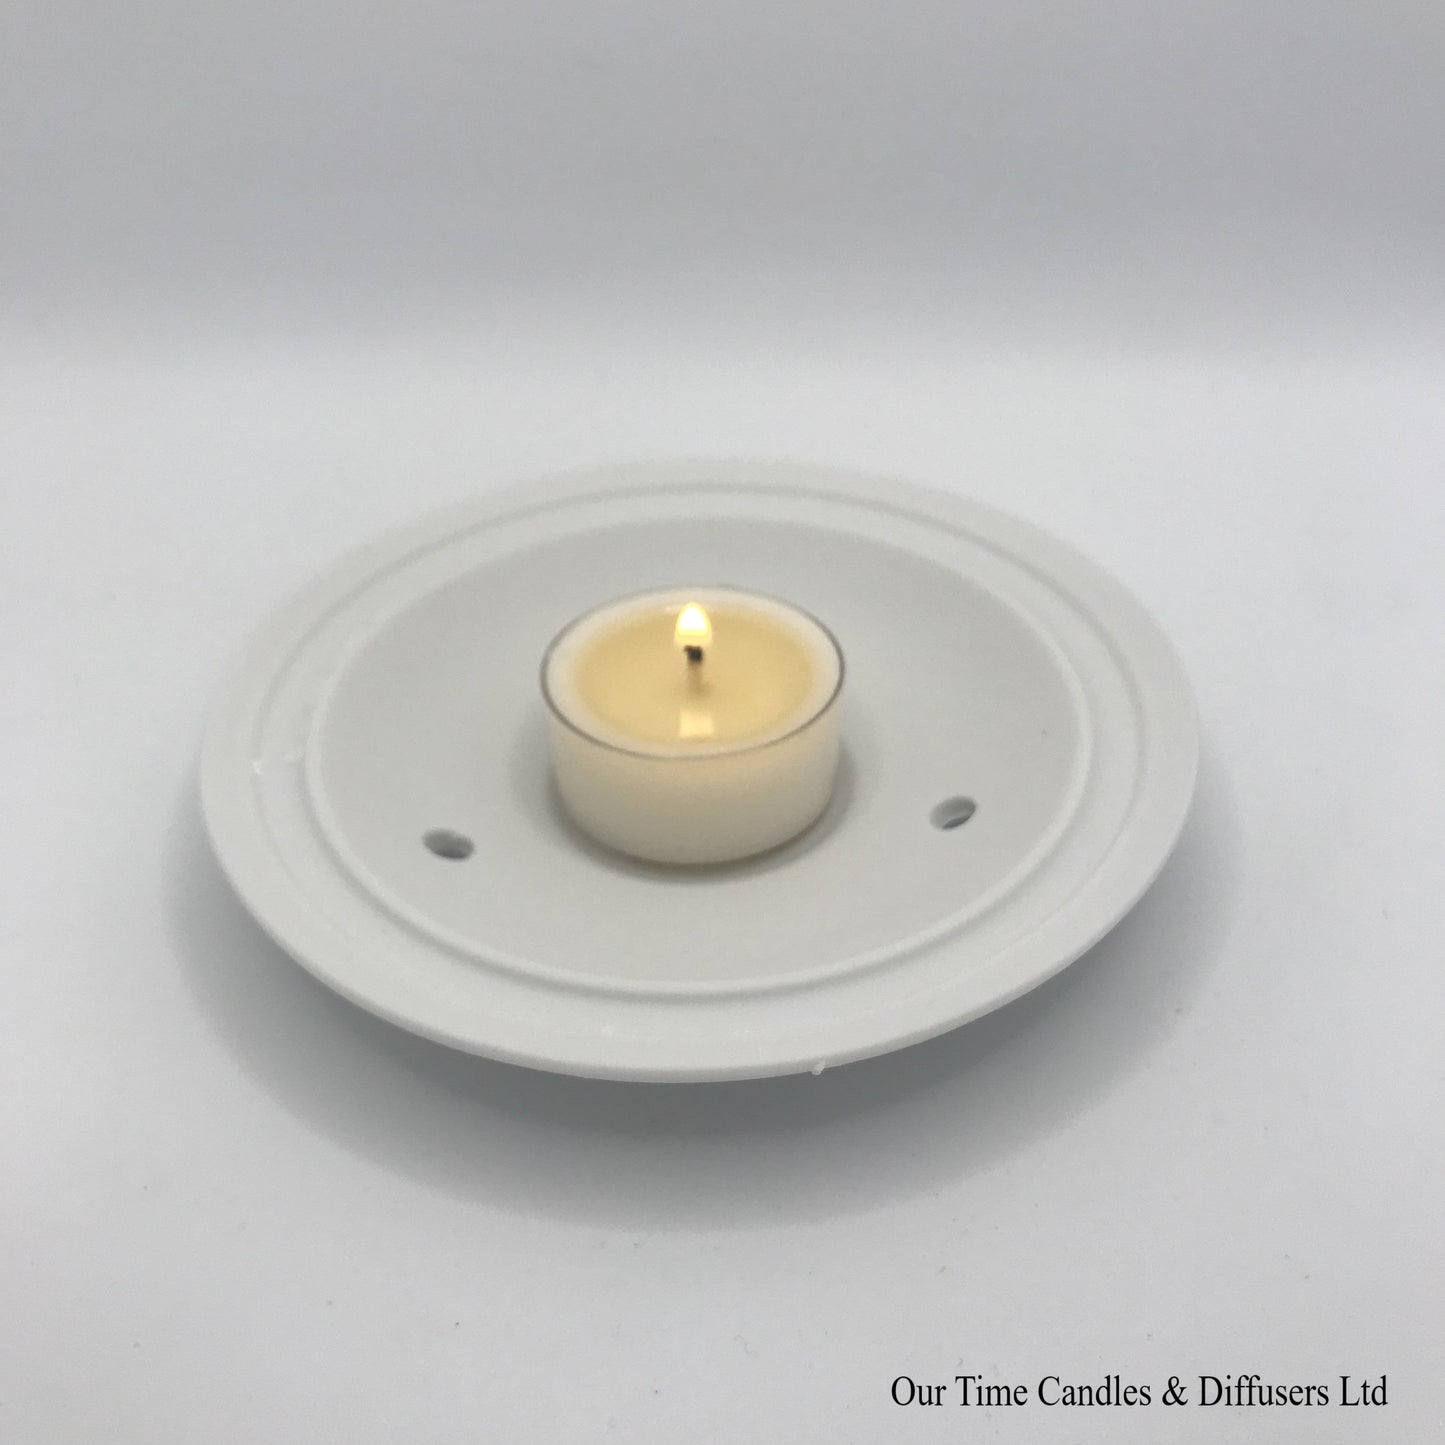 Tealight Holder - Base with tealight